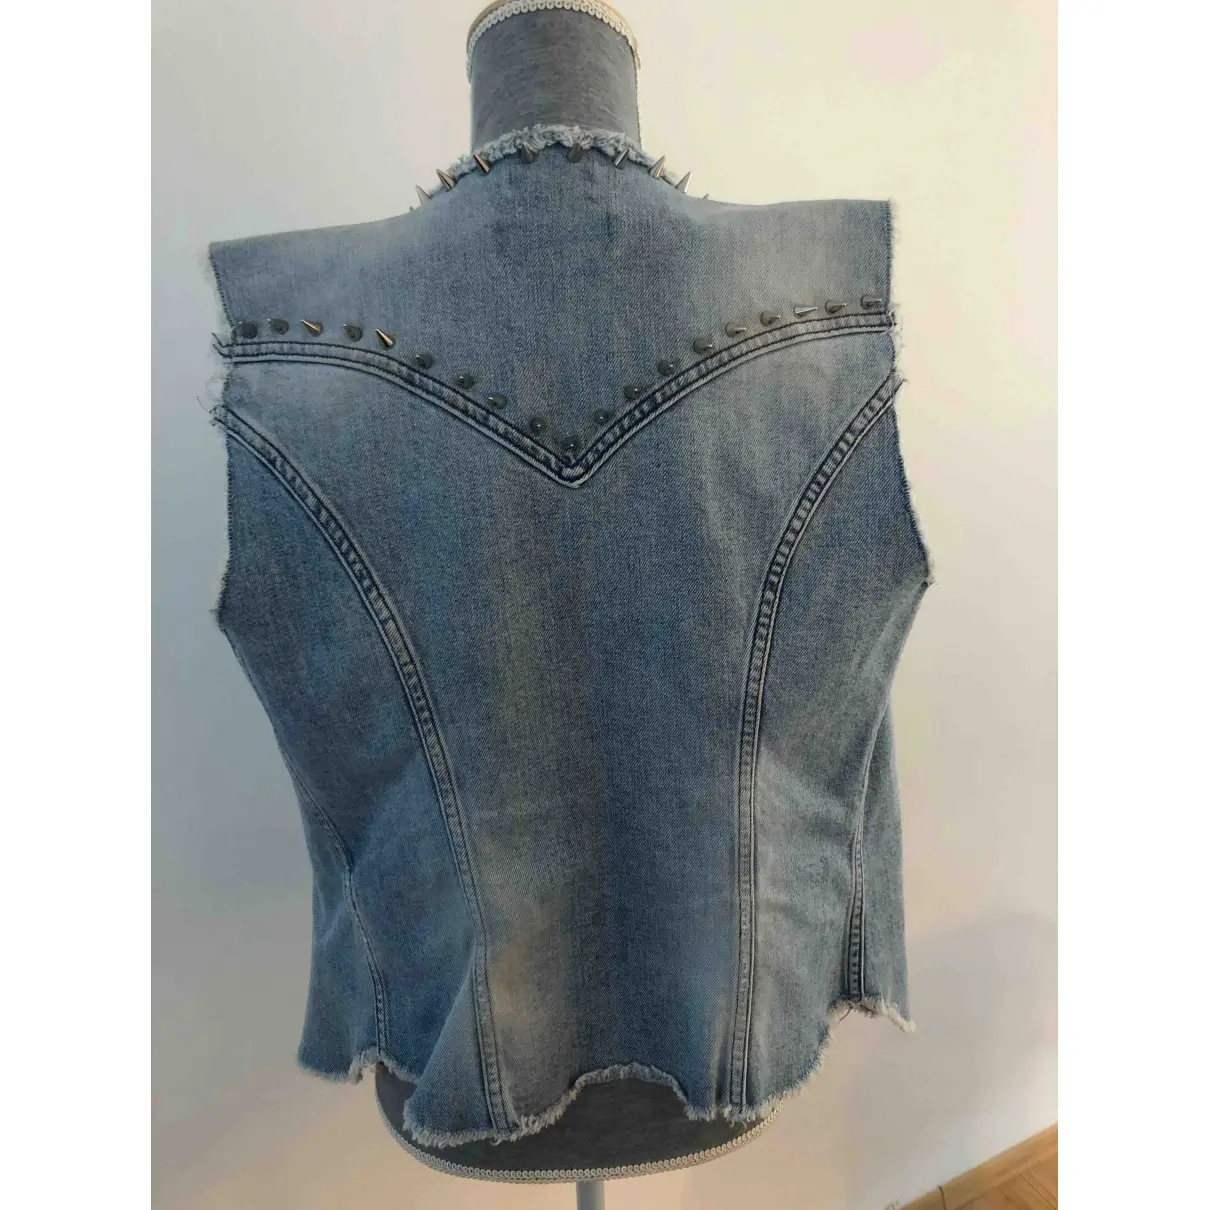 Cycle Vest for sale